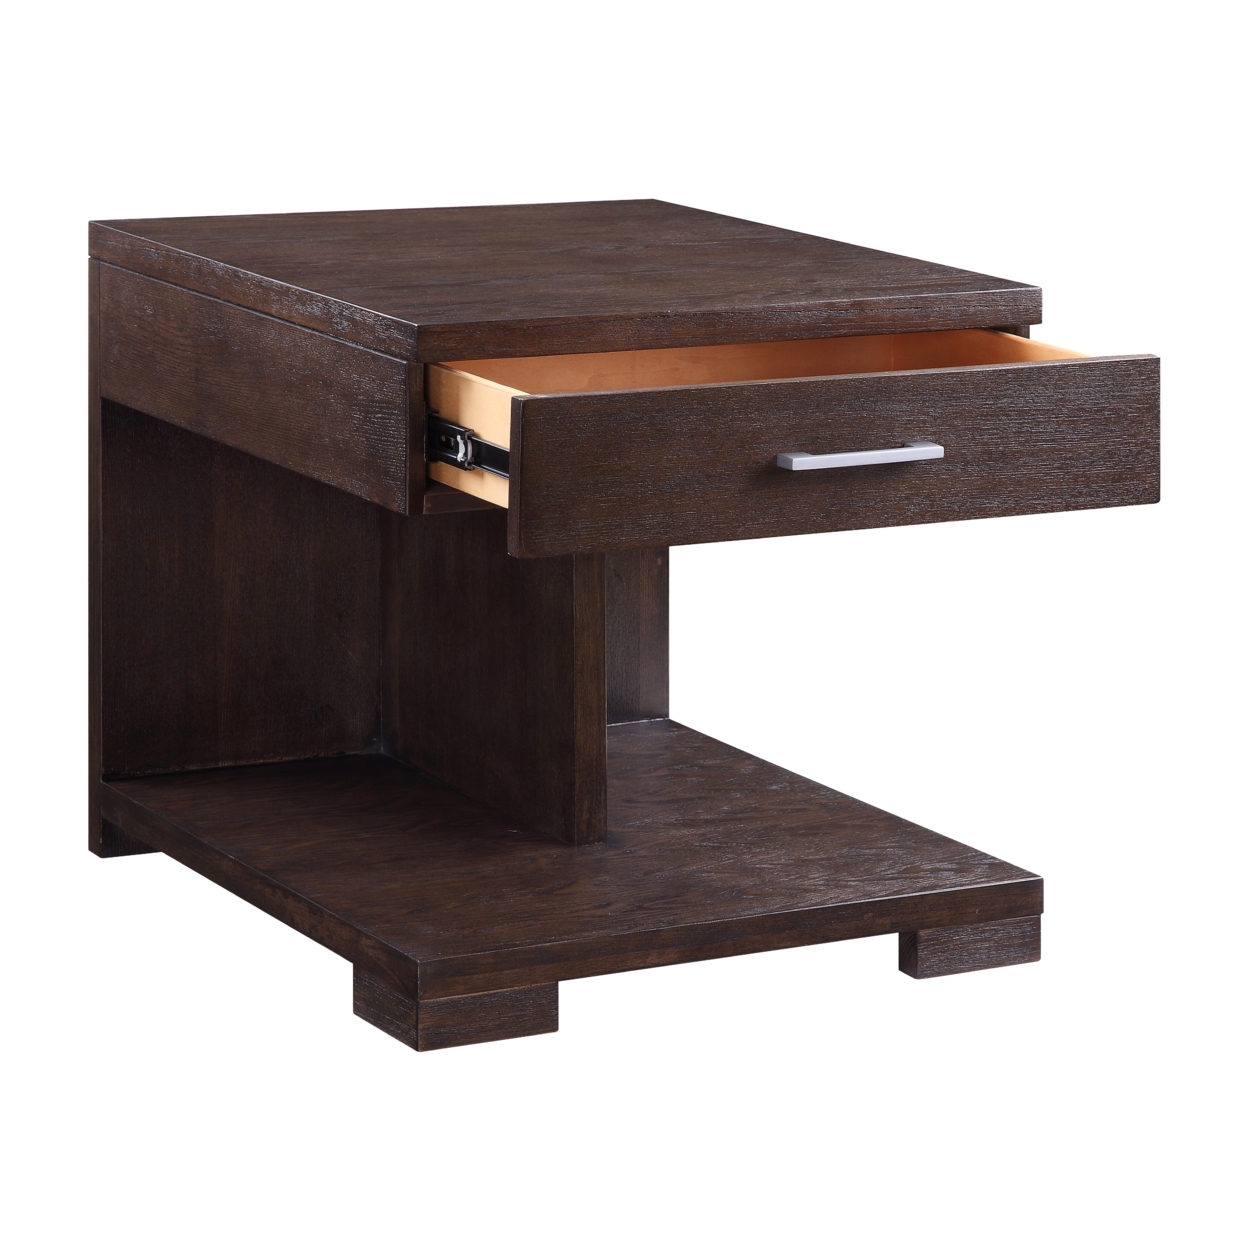 Wooden End Table With 1 Drawer, Brown- Saltoro Sherpi